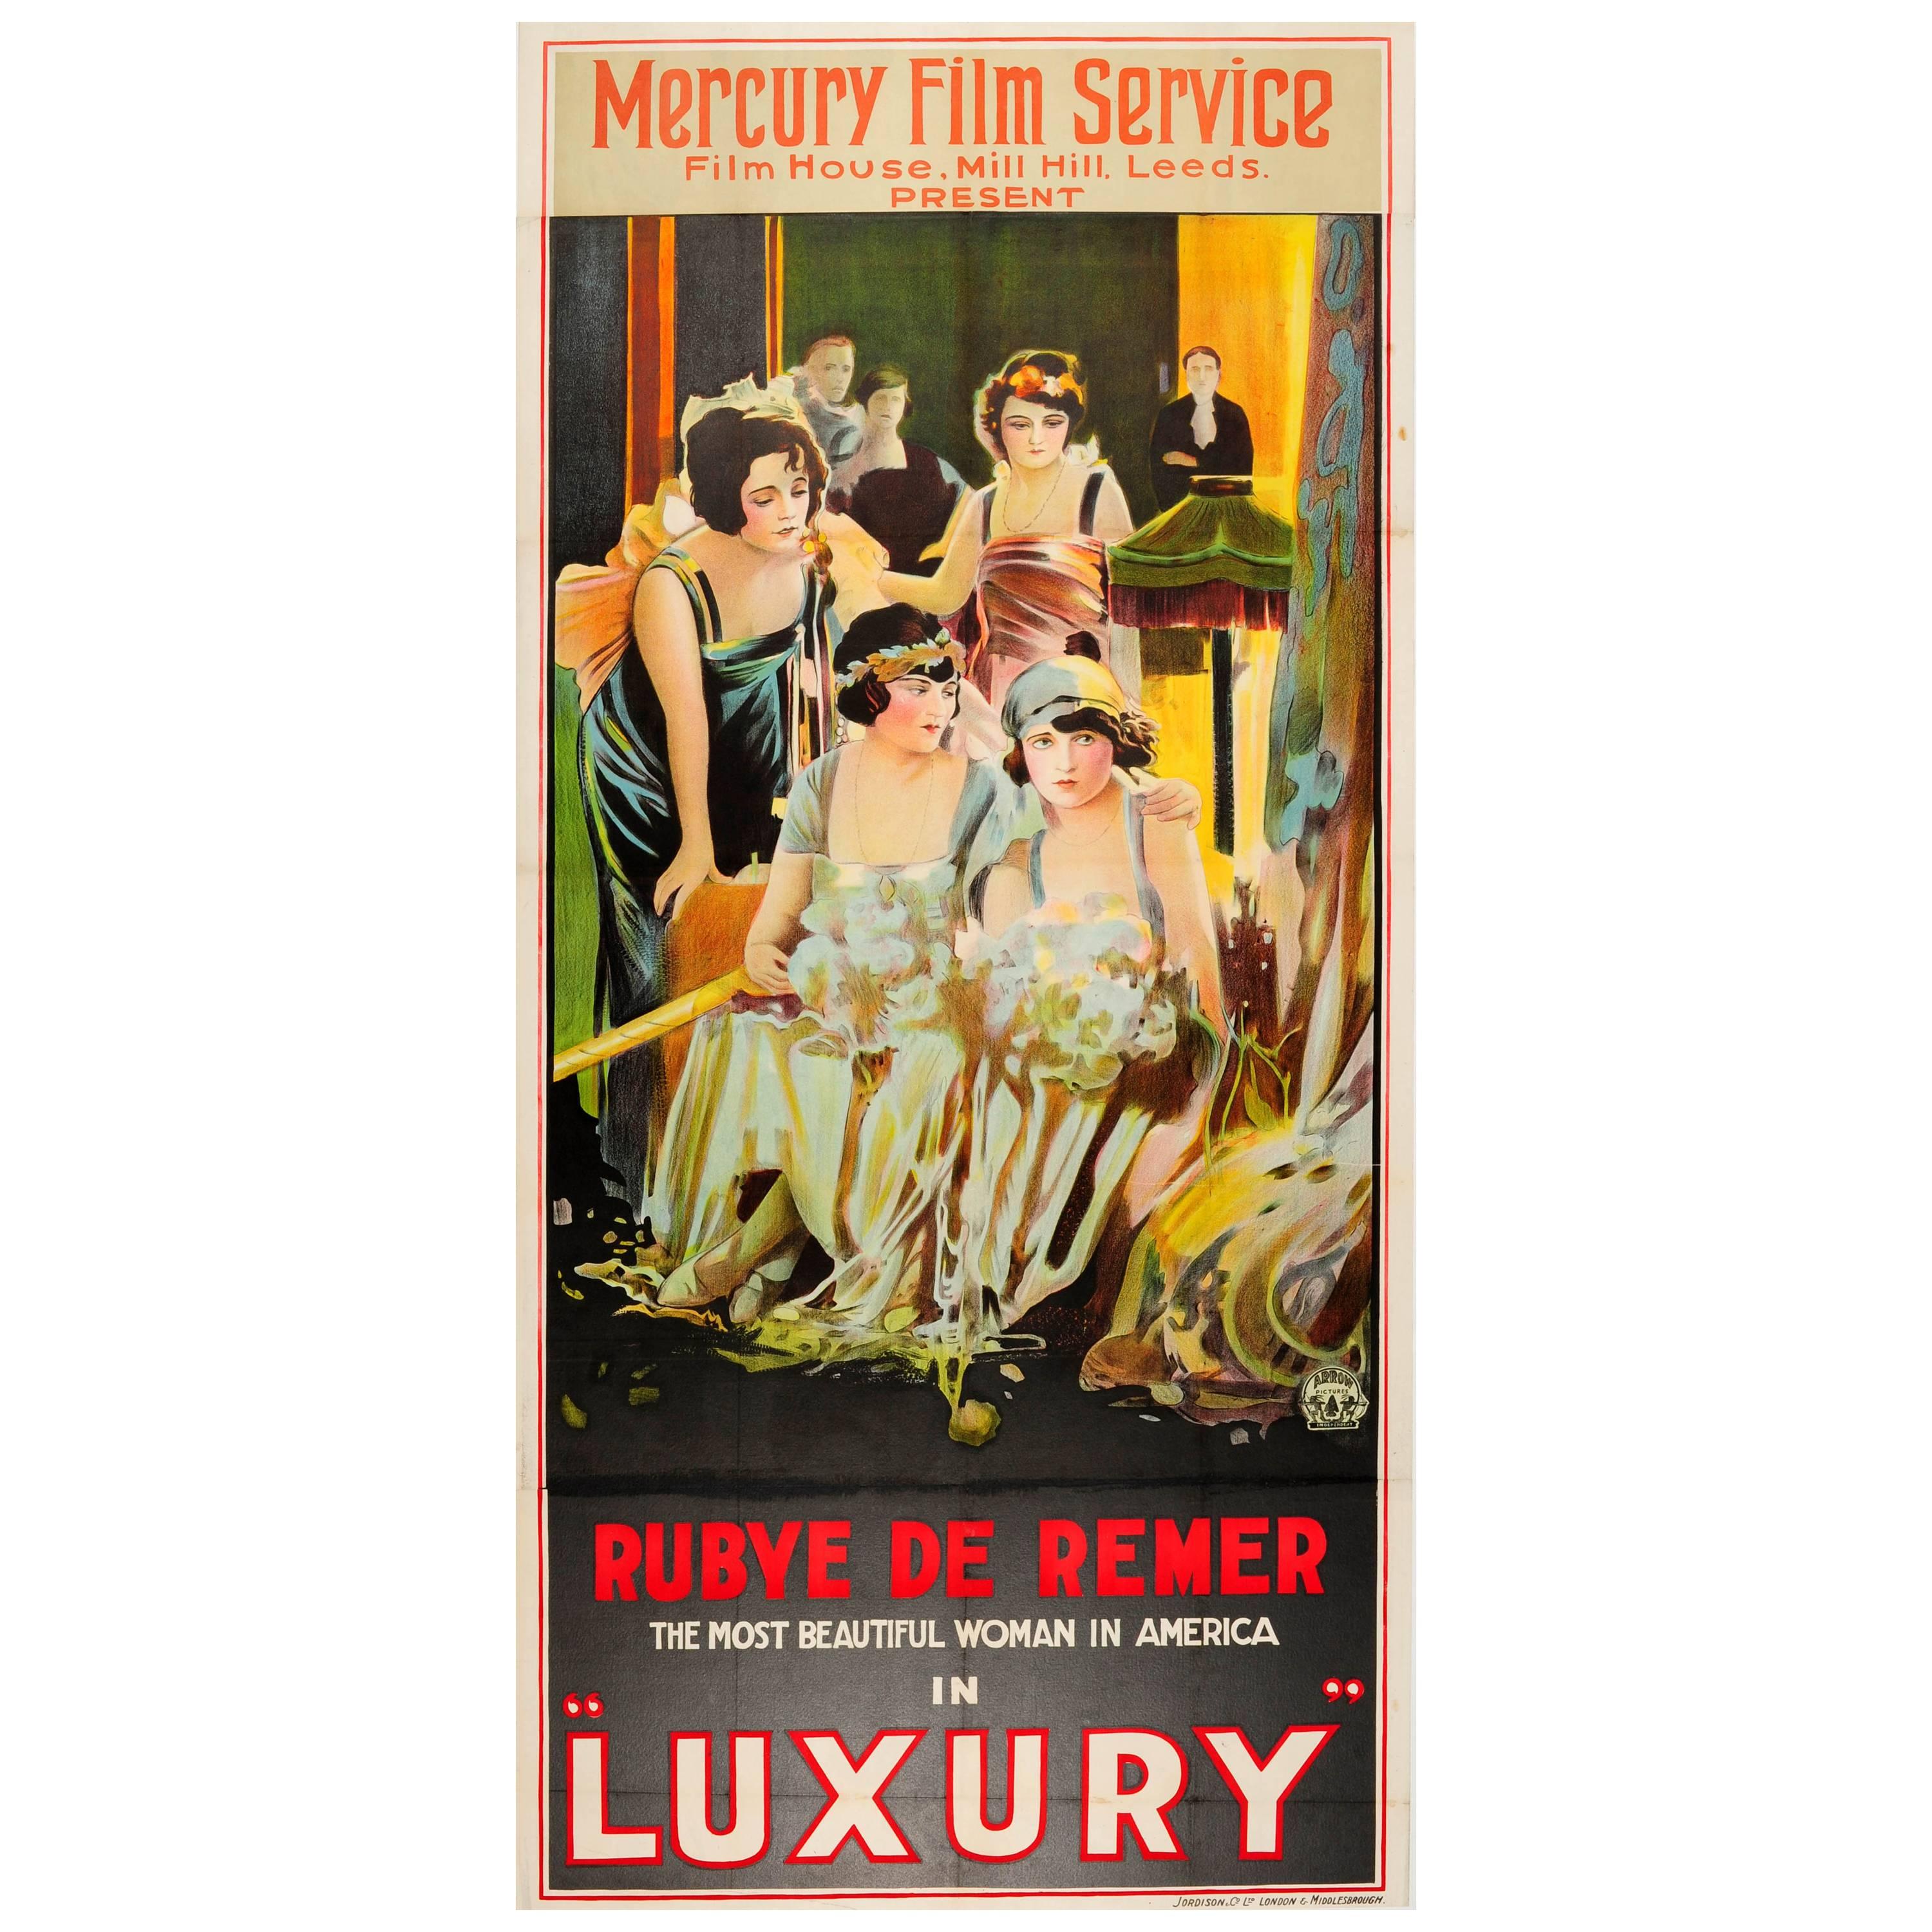 Large Original Vintage Movie Poster For The Film Luxury Starring Rubye De Remer For Sale